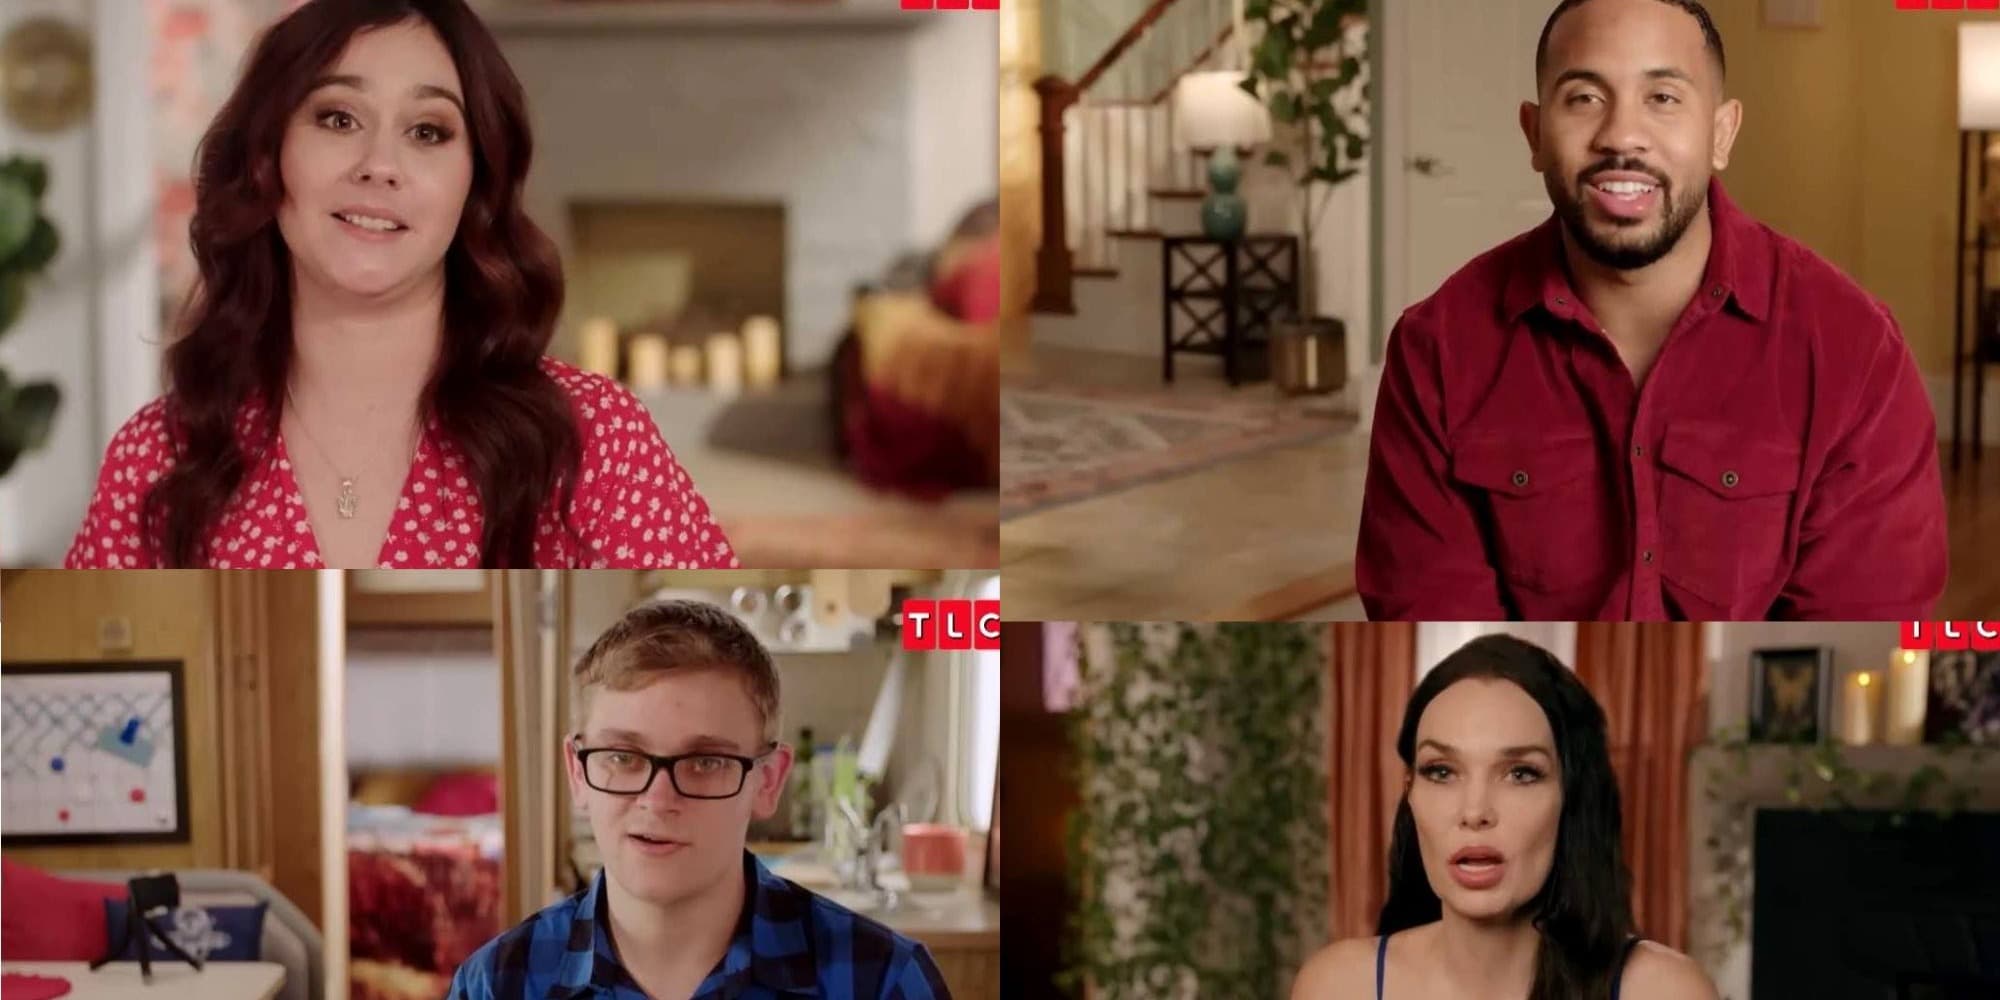 Still cuts from the show, 90 Day Fiance: The Other Way